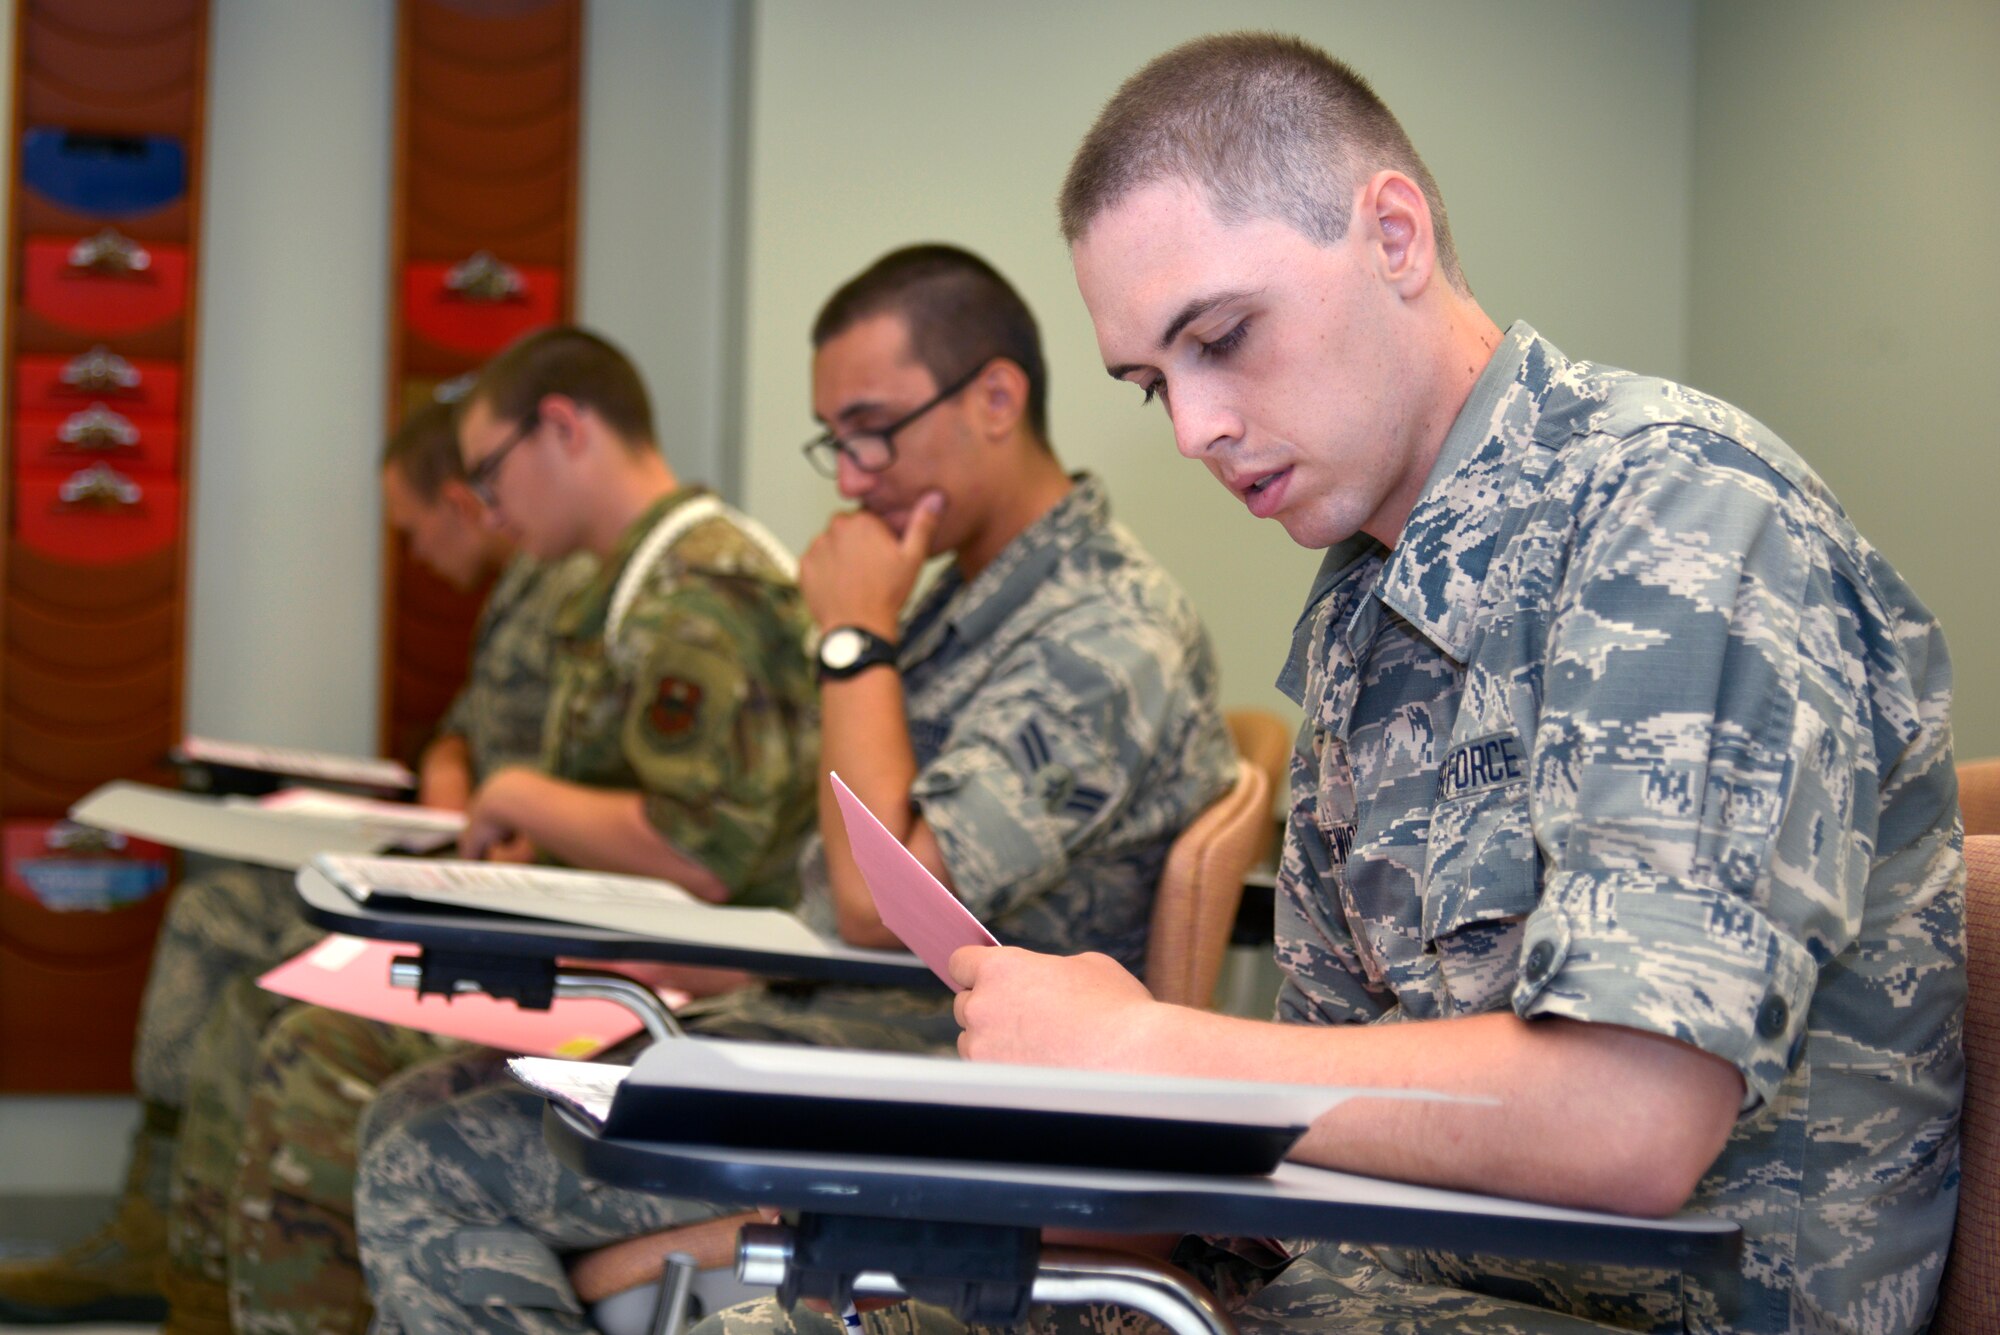 Airmen from the 81st Training Group fill out blood donation applications at the Blood Donor Center at Keesler Air Force Base, Mississippi, July 16, 2019. The Keesler Blood Donor Center provides blood to deployed service members. (U.S. Air Force photo by Airman Seth Haddix)